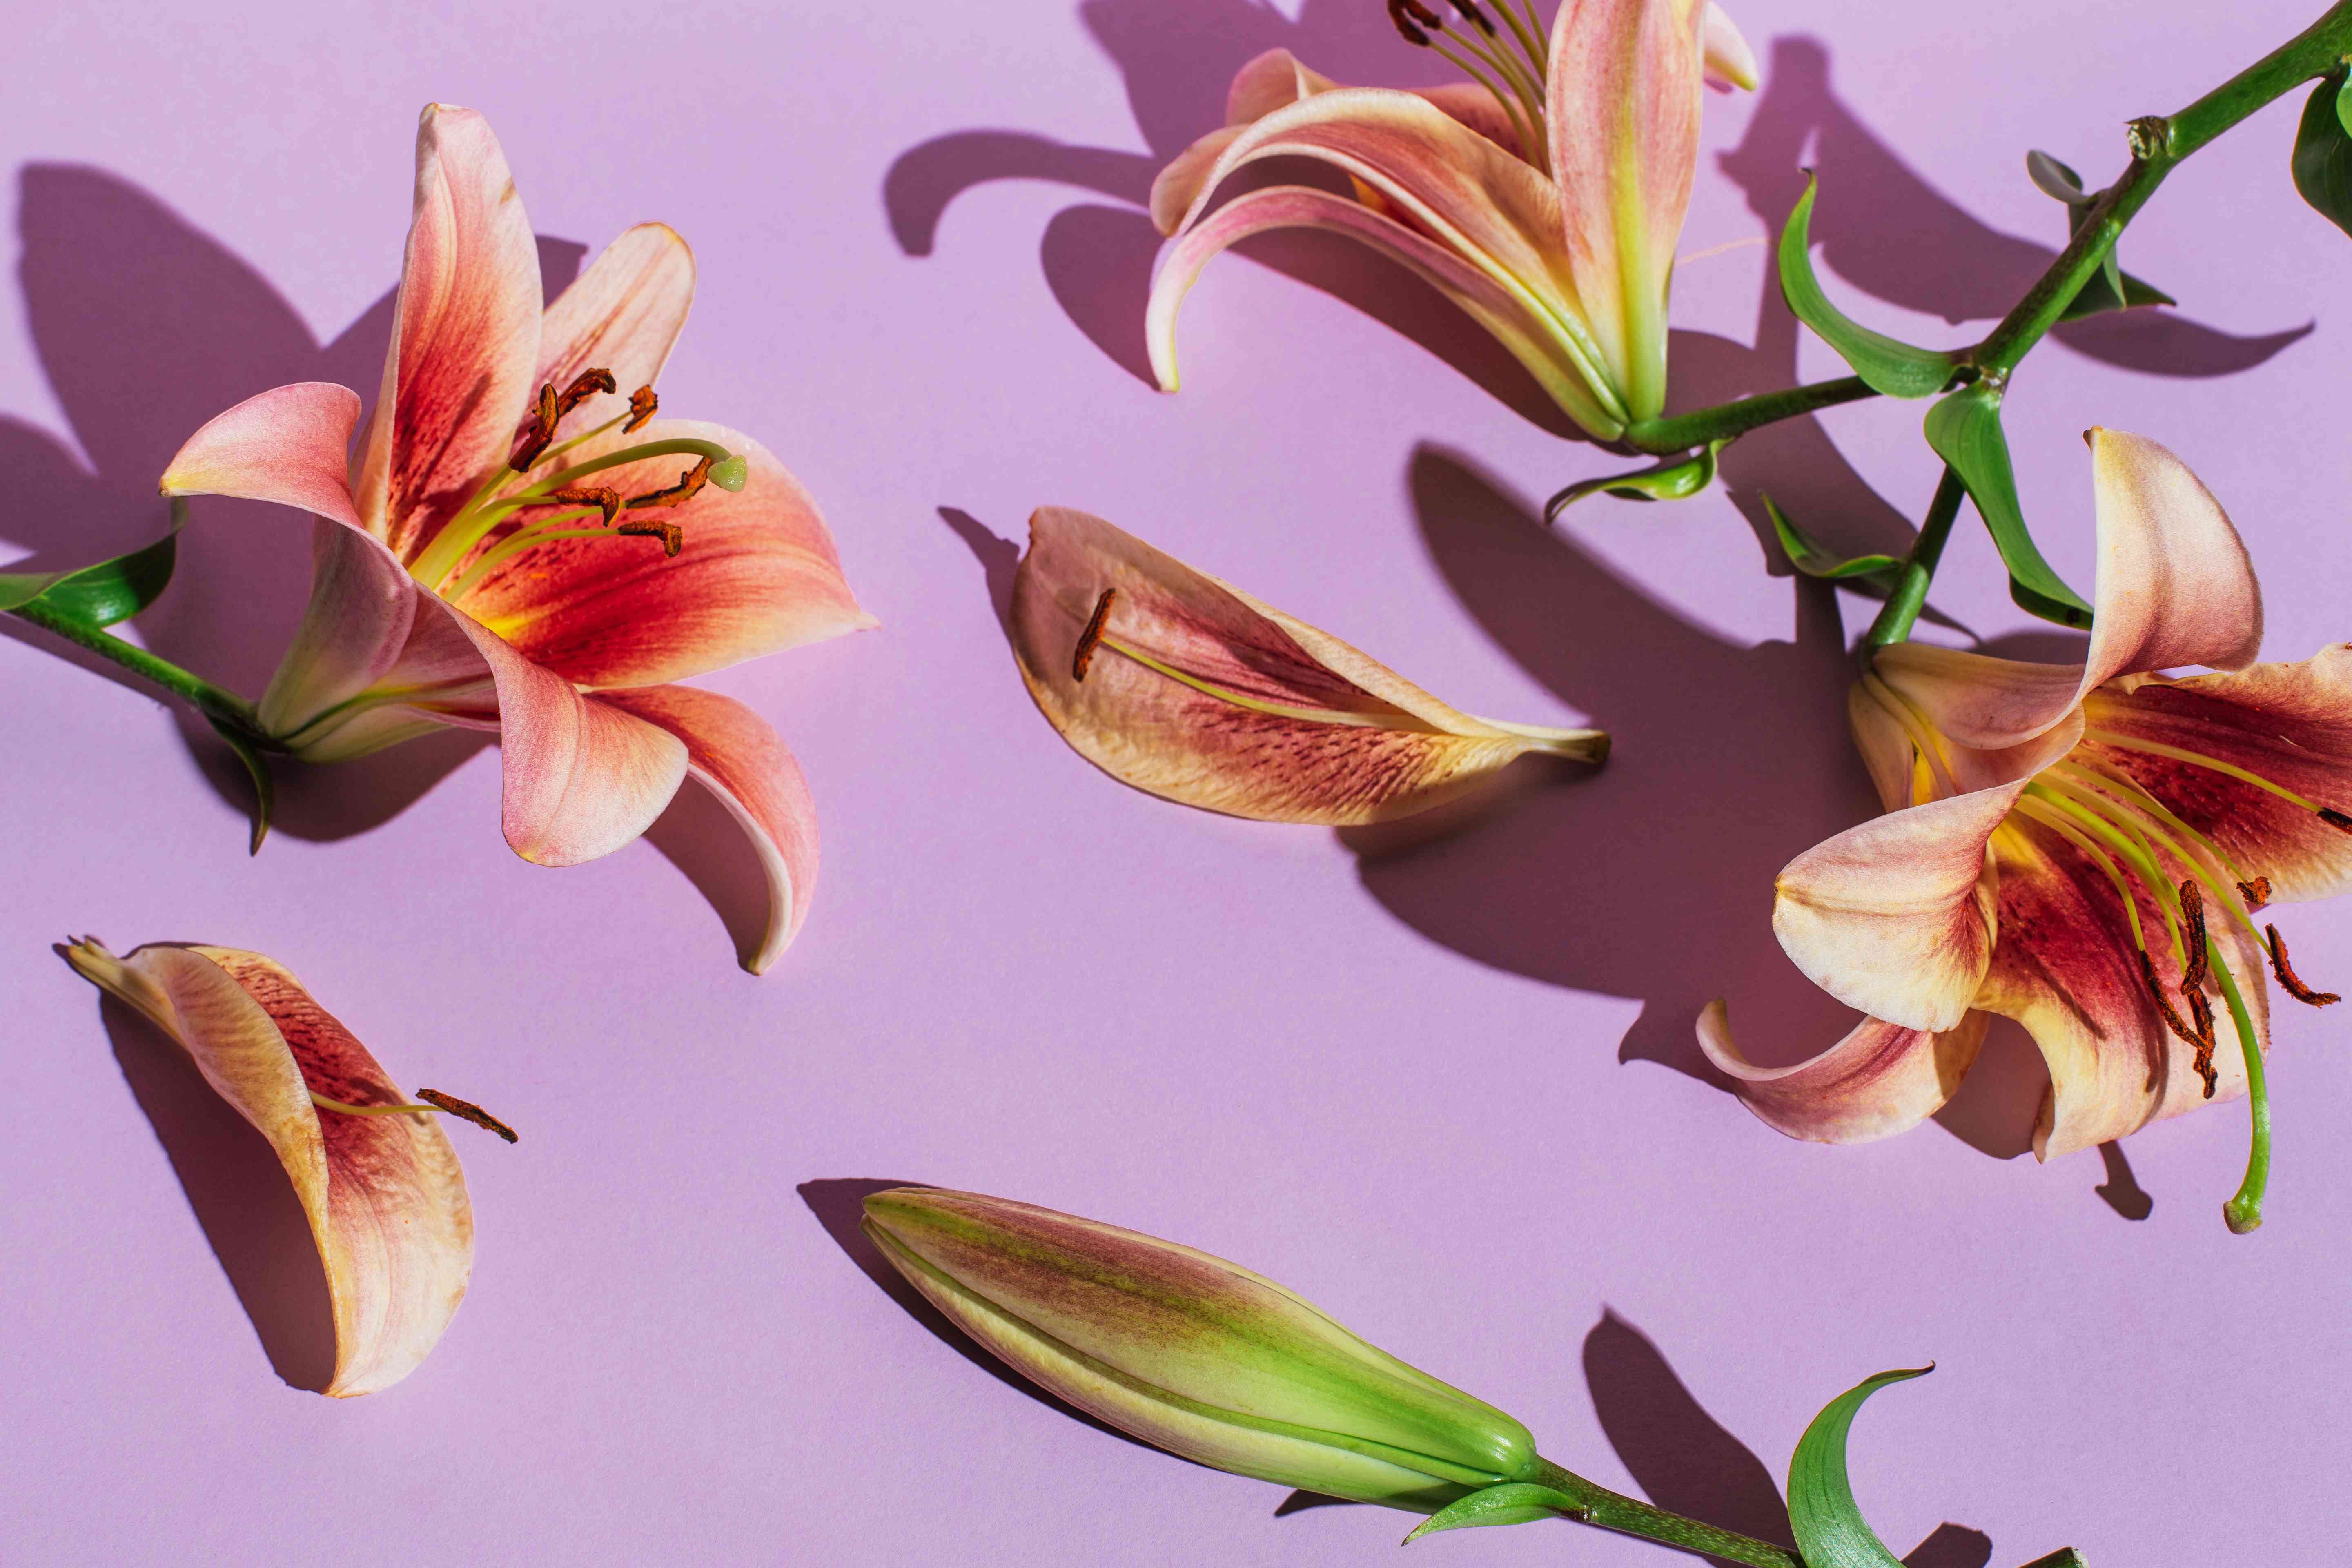 7 Different Types of Lilies to Consider for an Elegant Garden